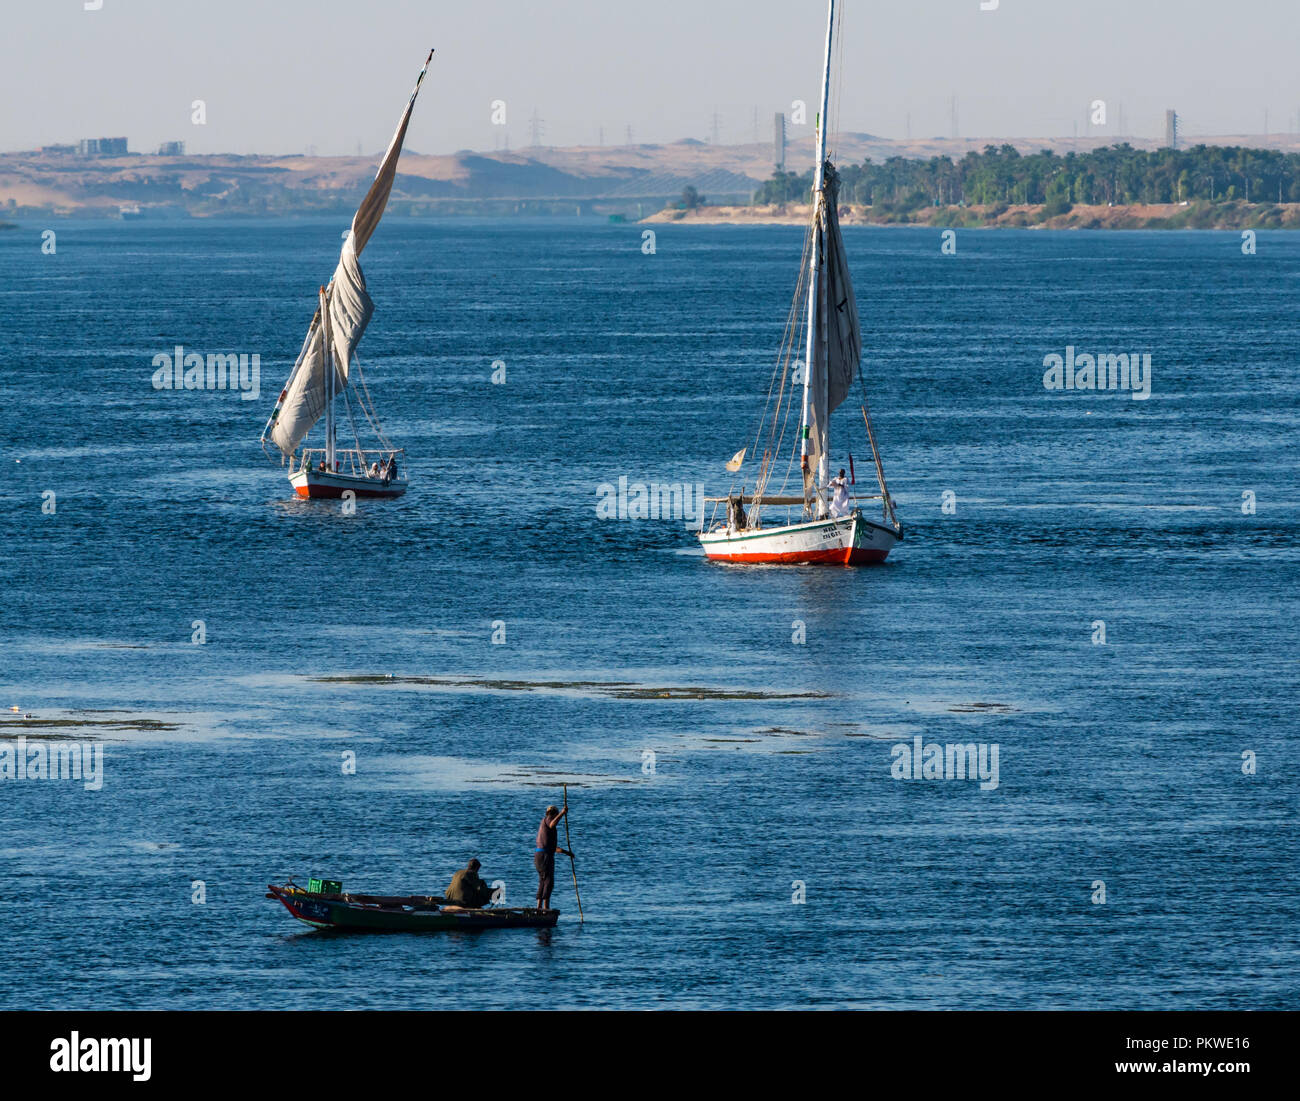 Traditional felucca sailing boats with local Egyptian men using fishing net from small rowing boat, River Nile, Aswan, Egypt, Africa Stock Photo